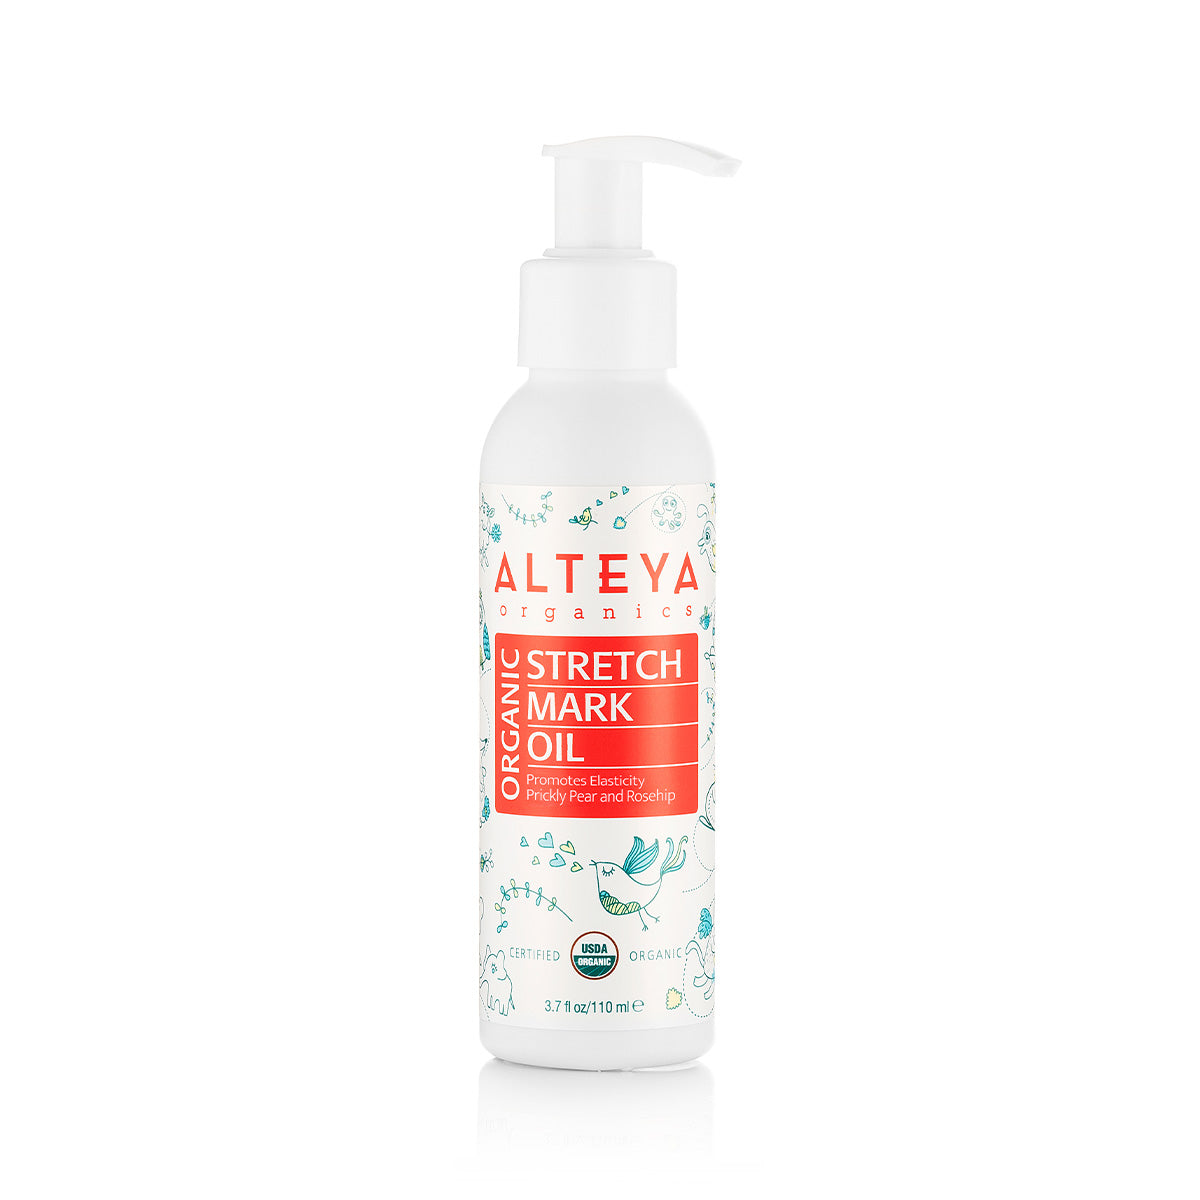 A premium blend bottle of Alteya Organics Pregnancy Stretch Mark Oil Certified organic containing plant based oils, enriched with Bulgarian rose oil, displayed on a clean white background.